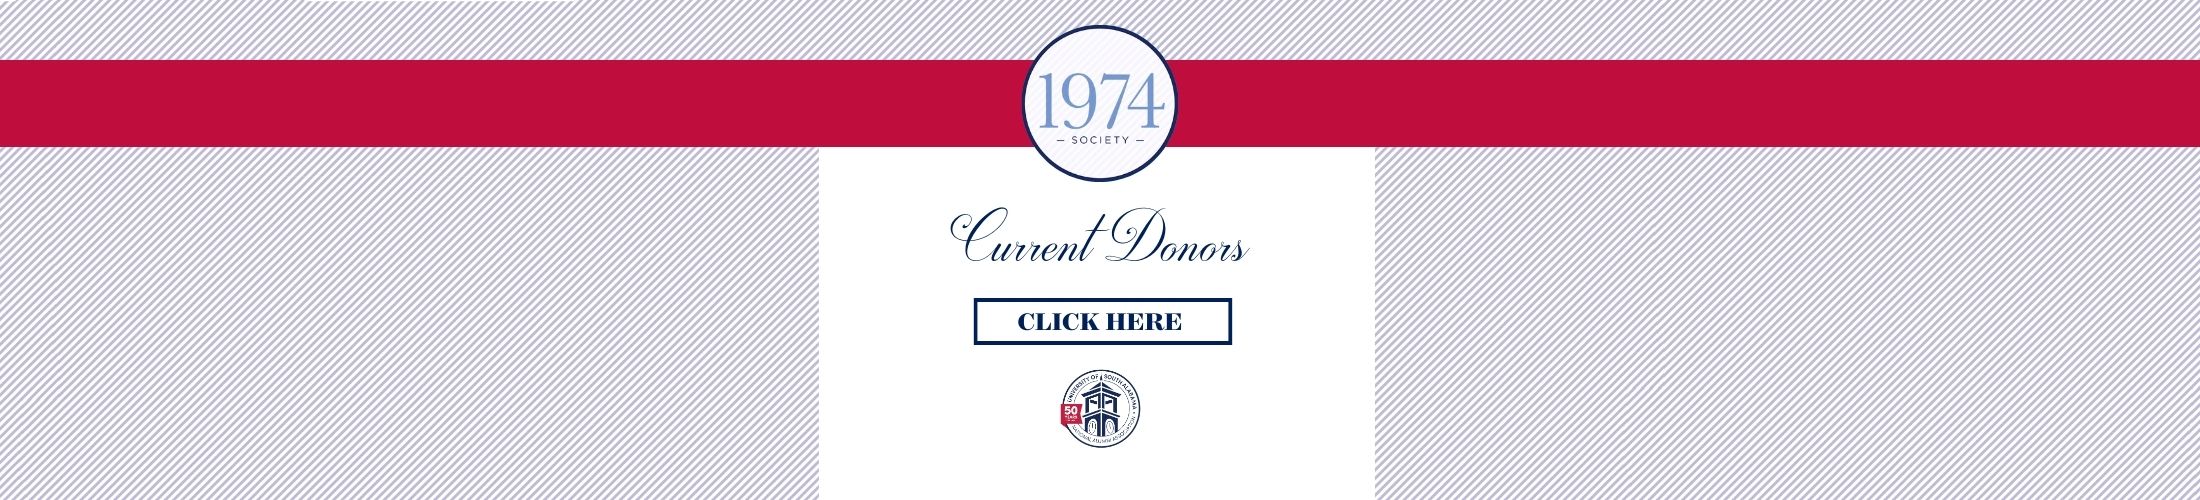 1974 Society Current Donors Click Here